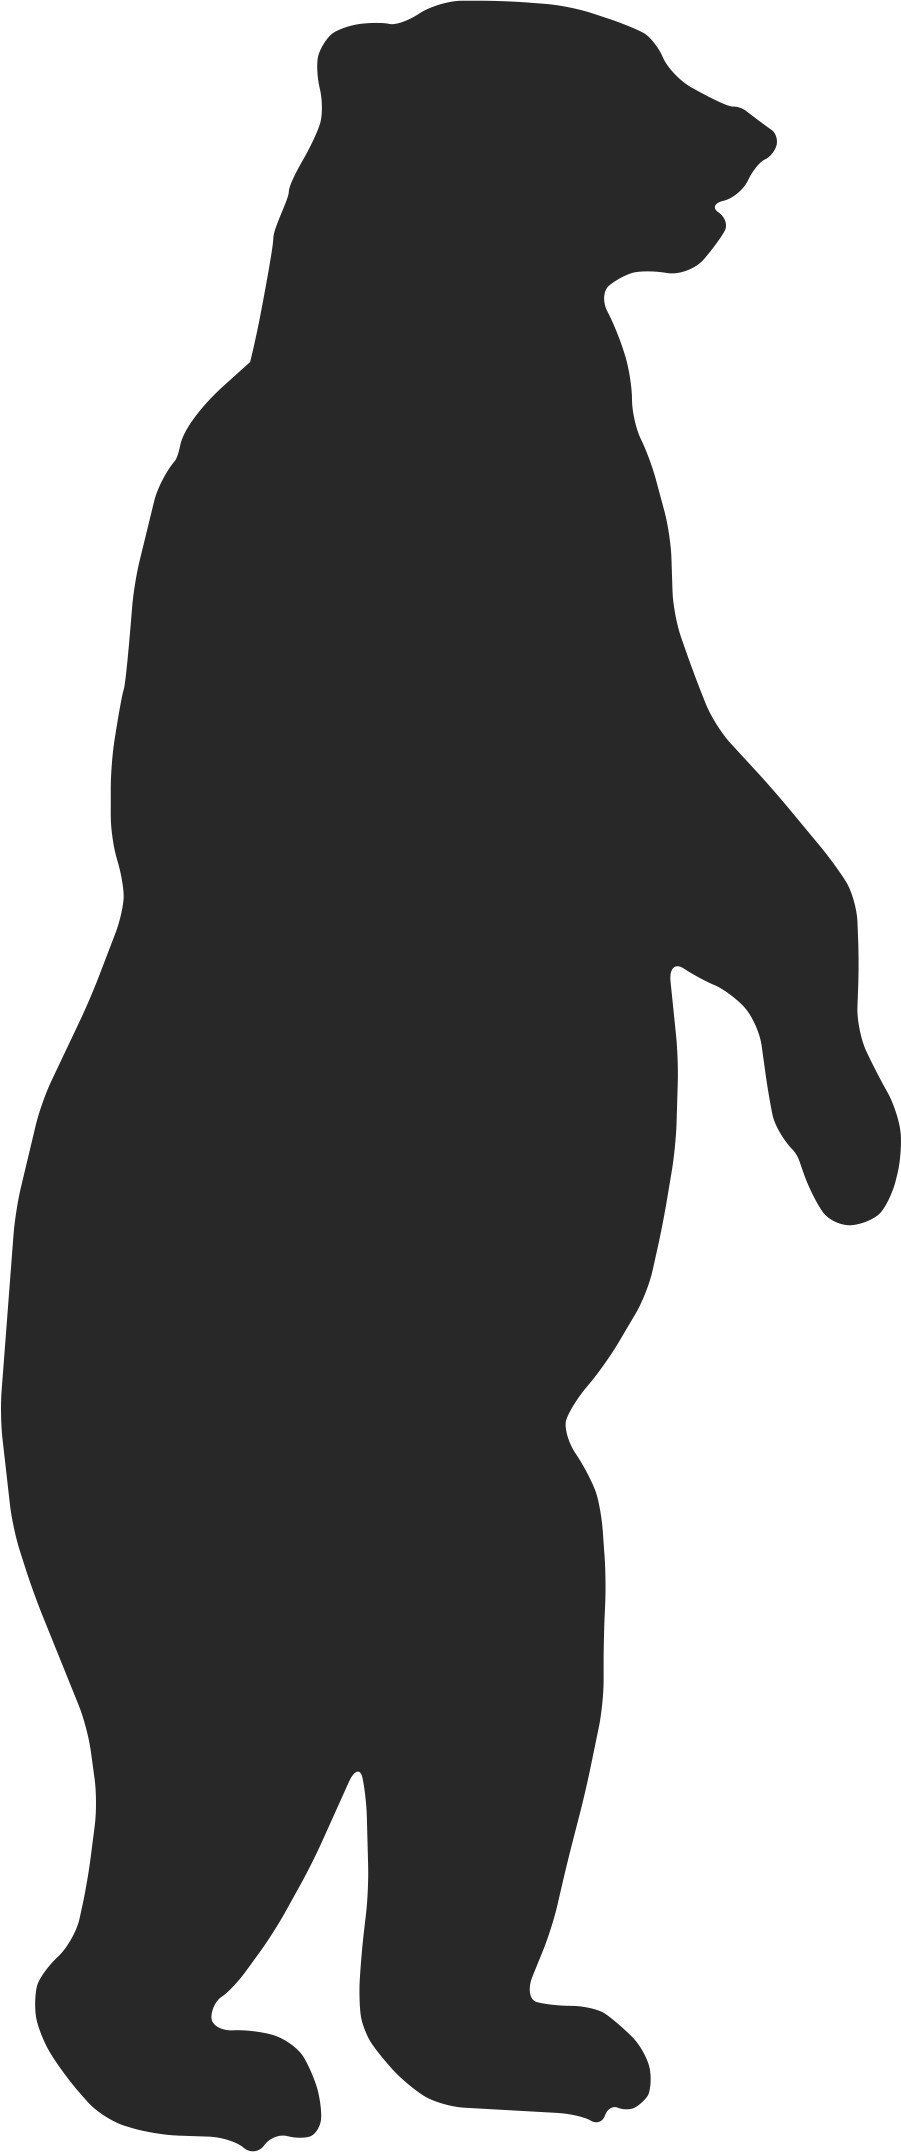 Pre-fused, Laser-cut Silhouettes: Grizzly Bear standing